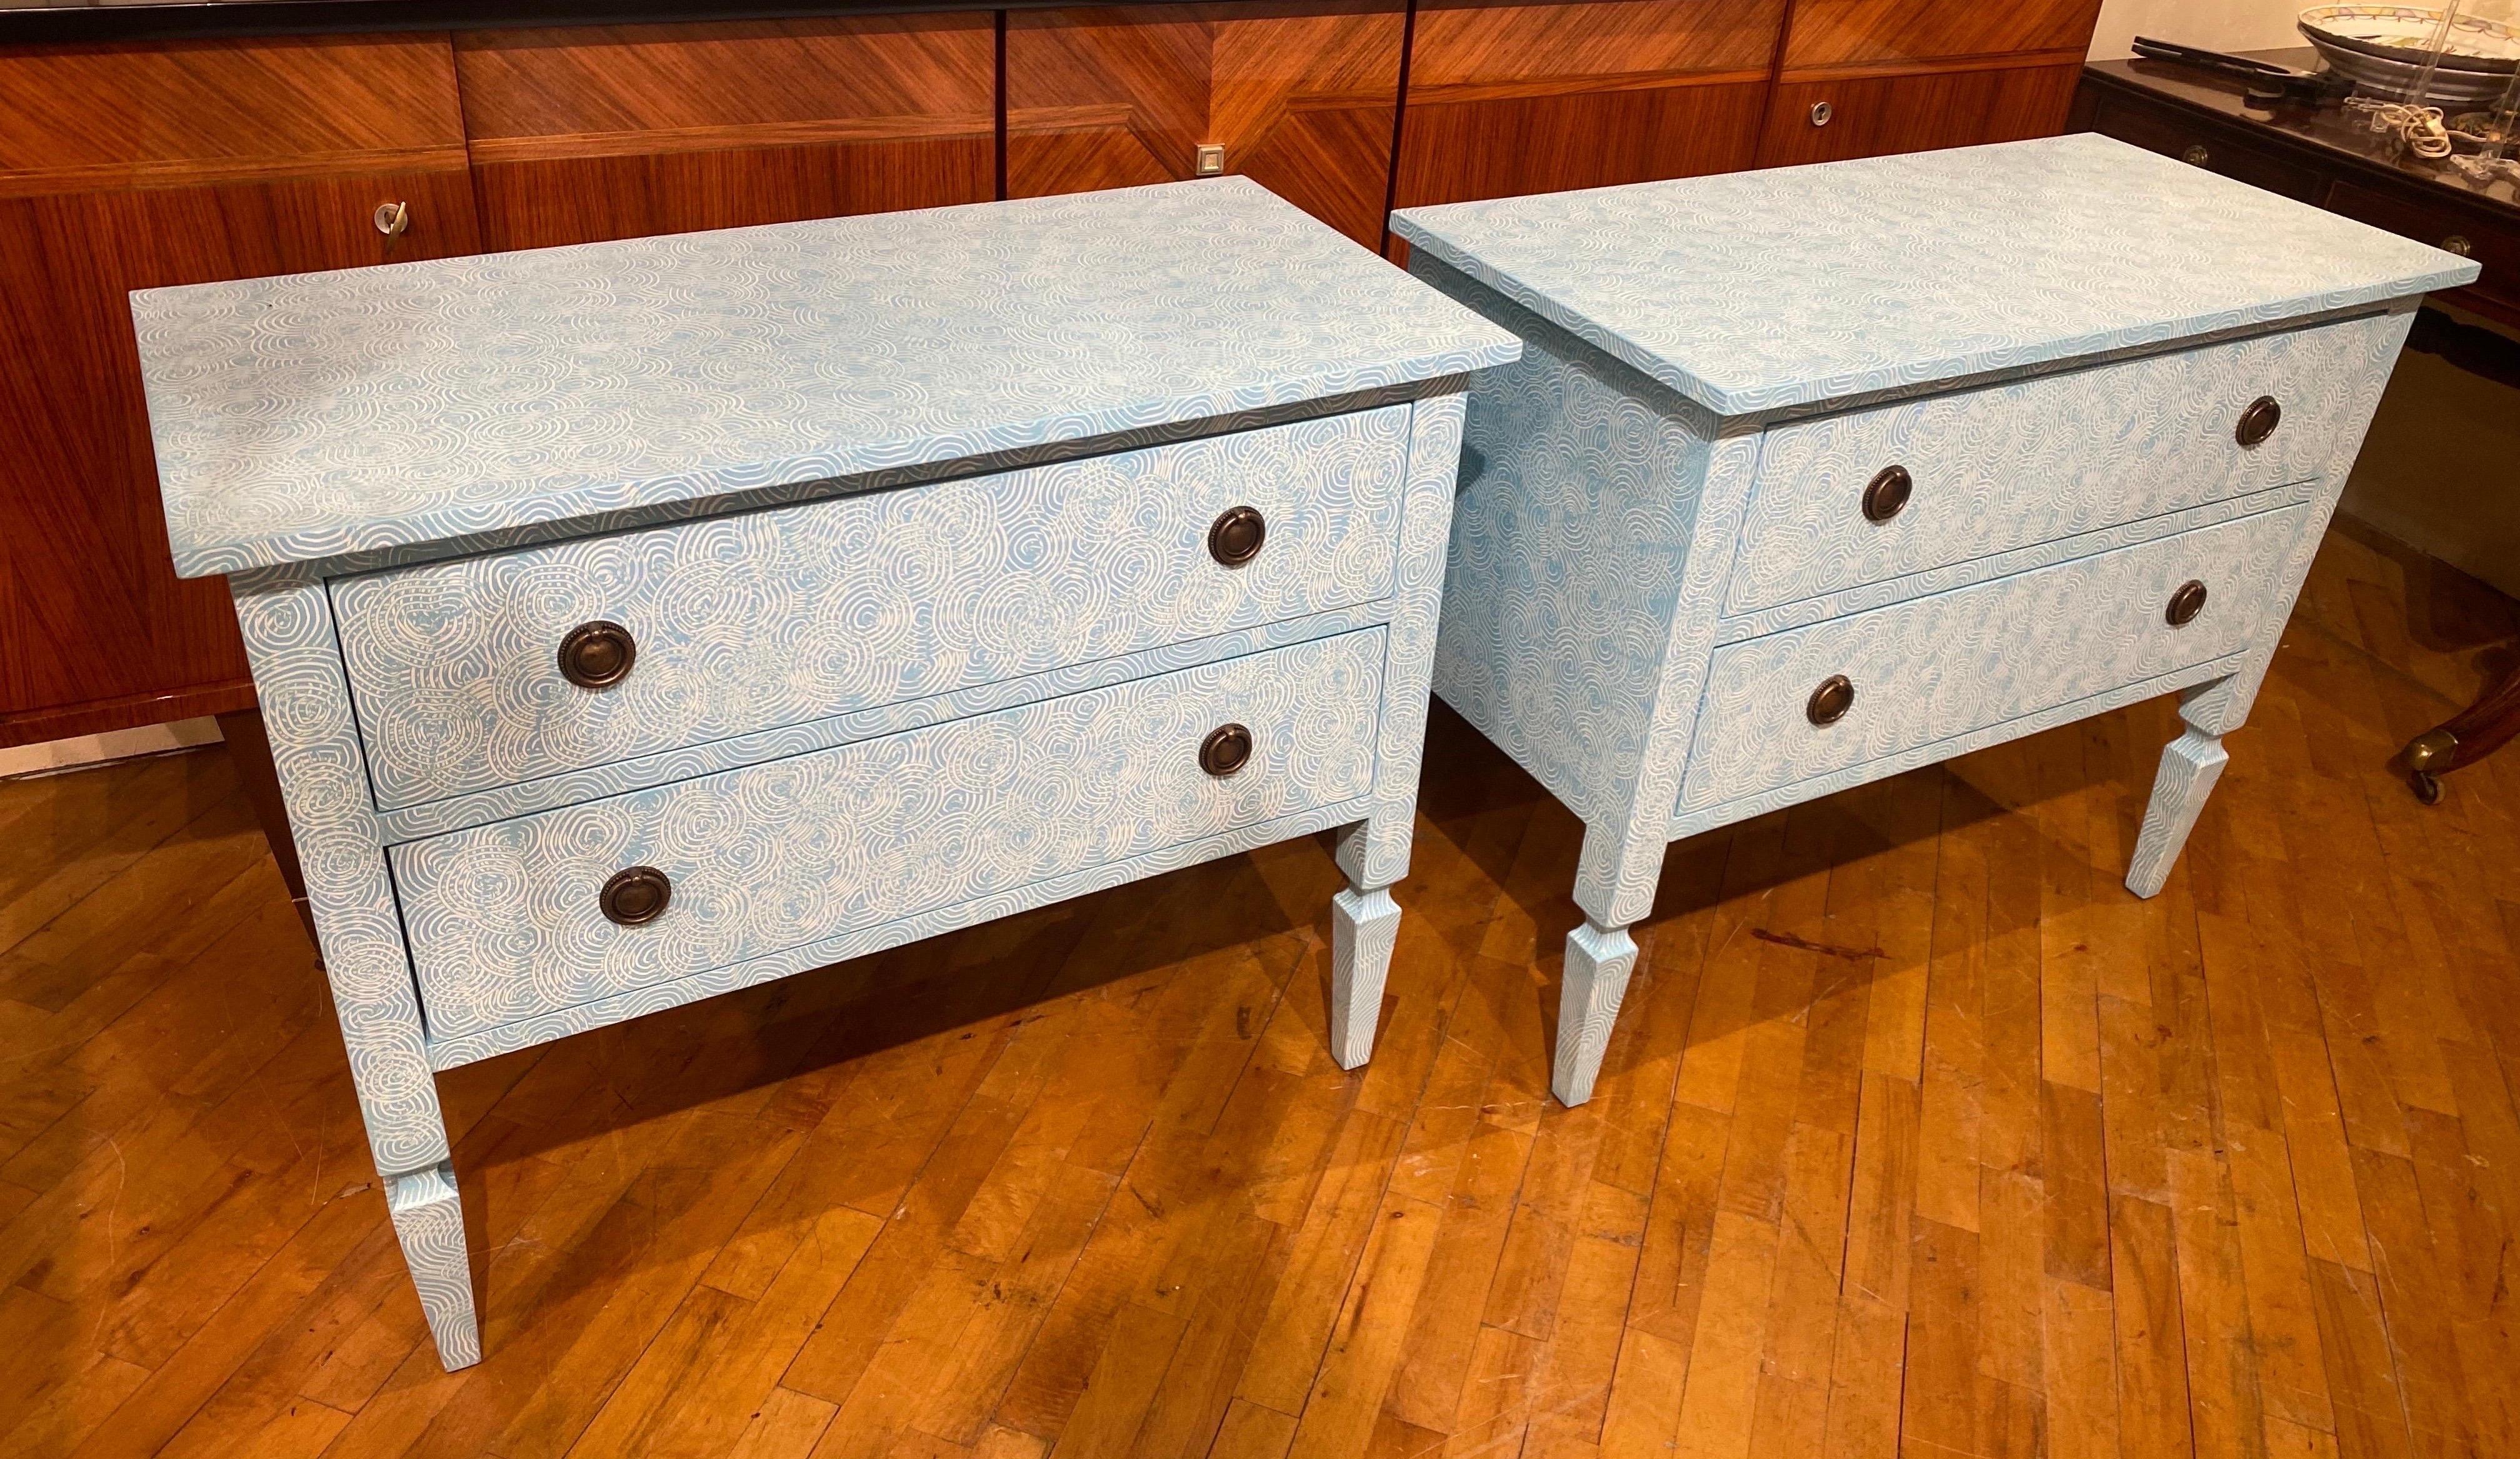 Stylish custom made hand painted bedside chest of drawers in blue textured swirls on tapered feet.

